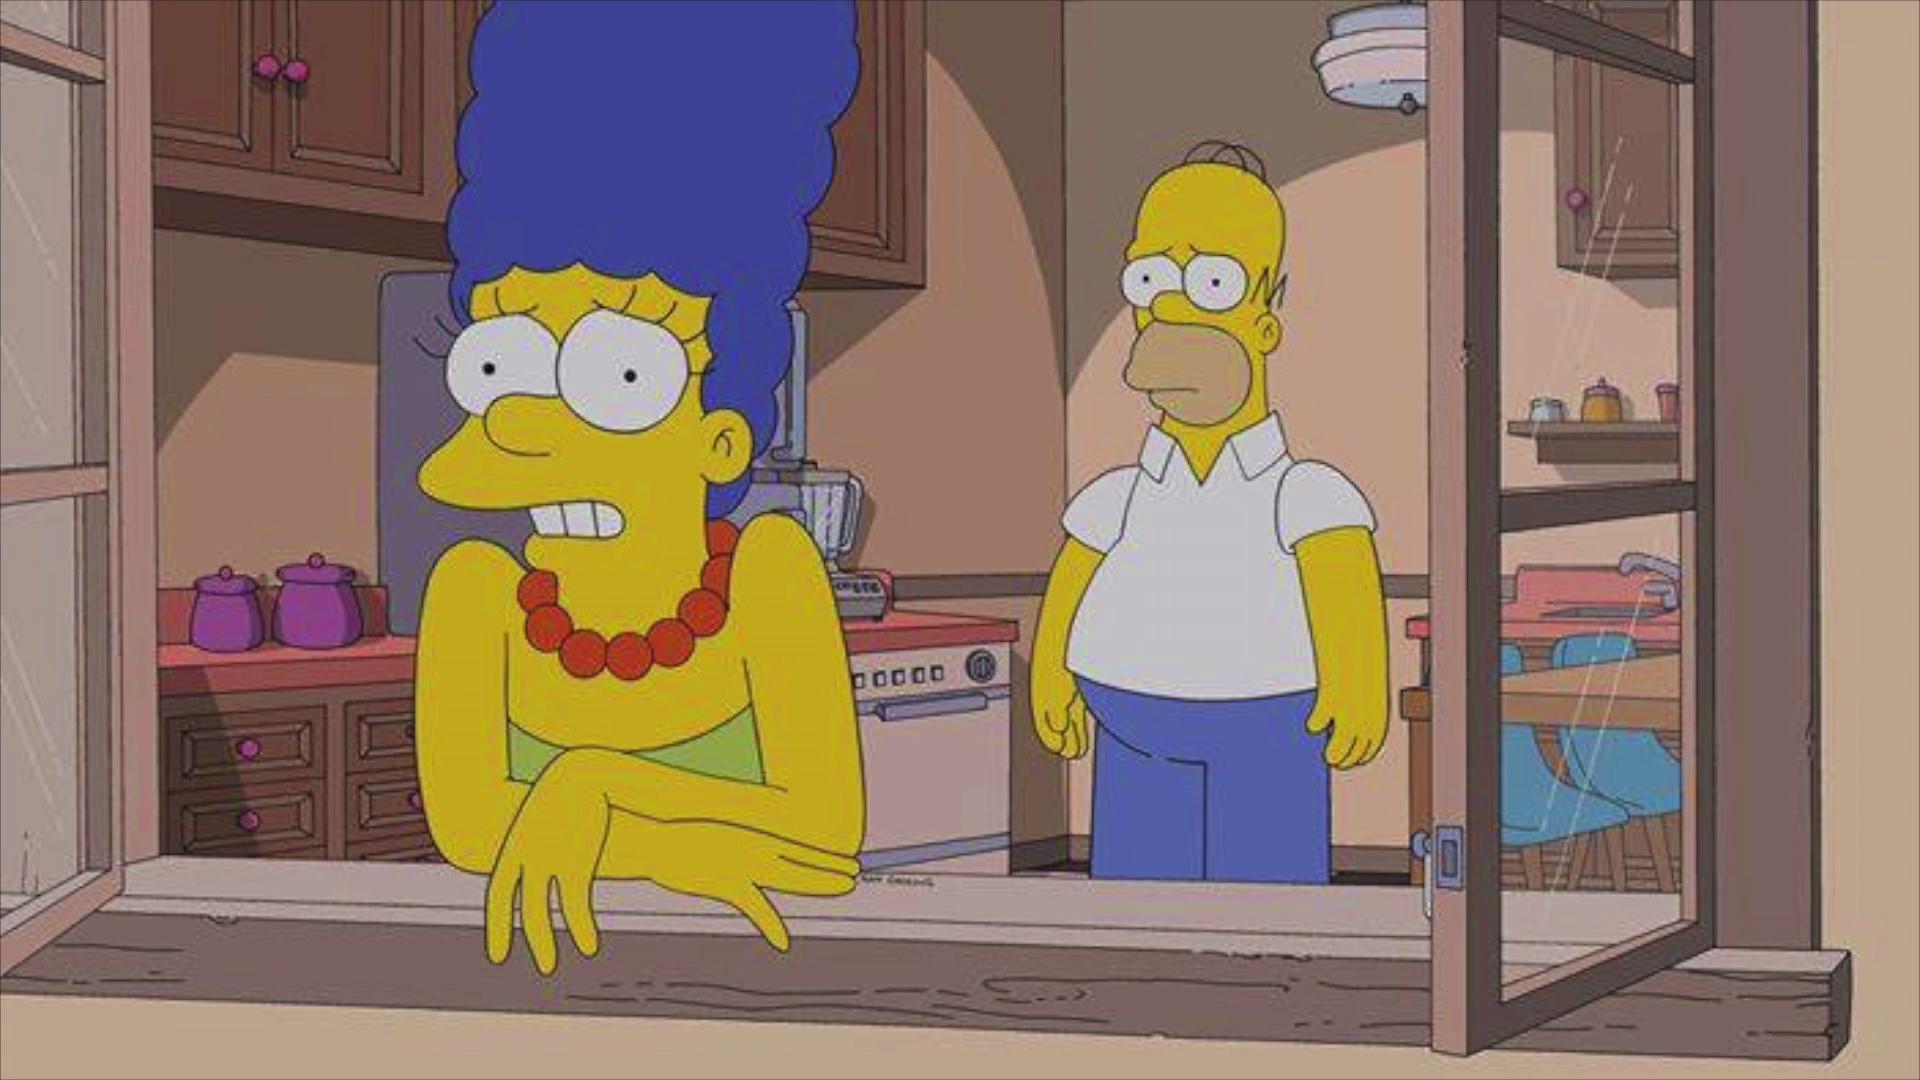 Marge And Homer To Separate In Season Premiere Of The Simpsons 4170